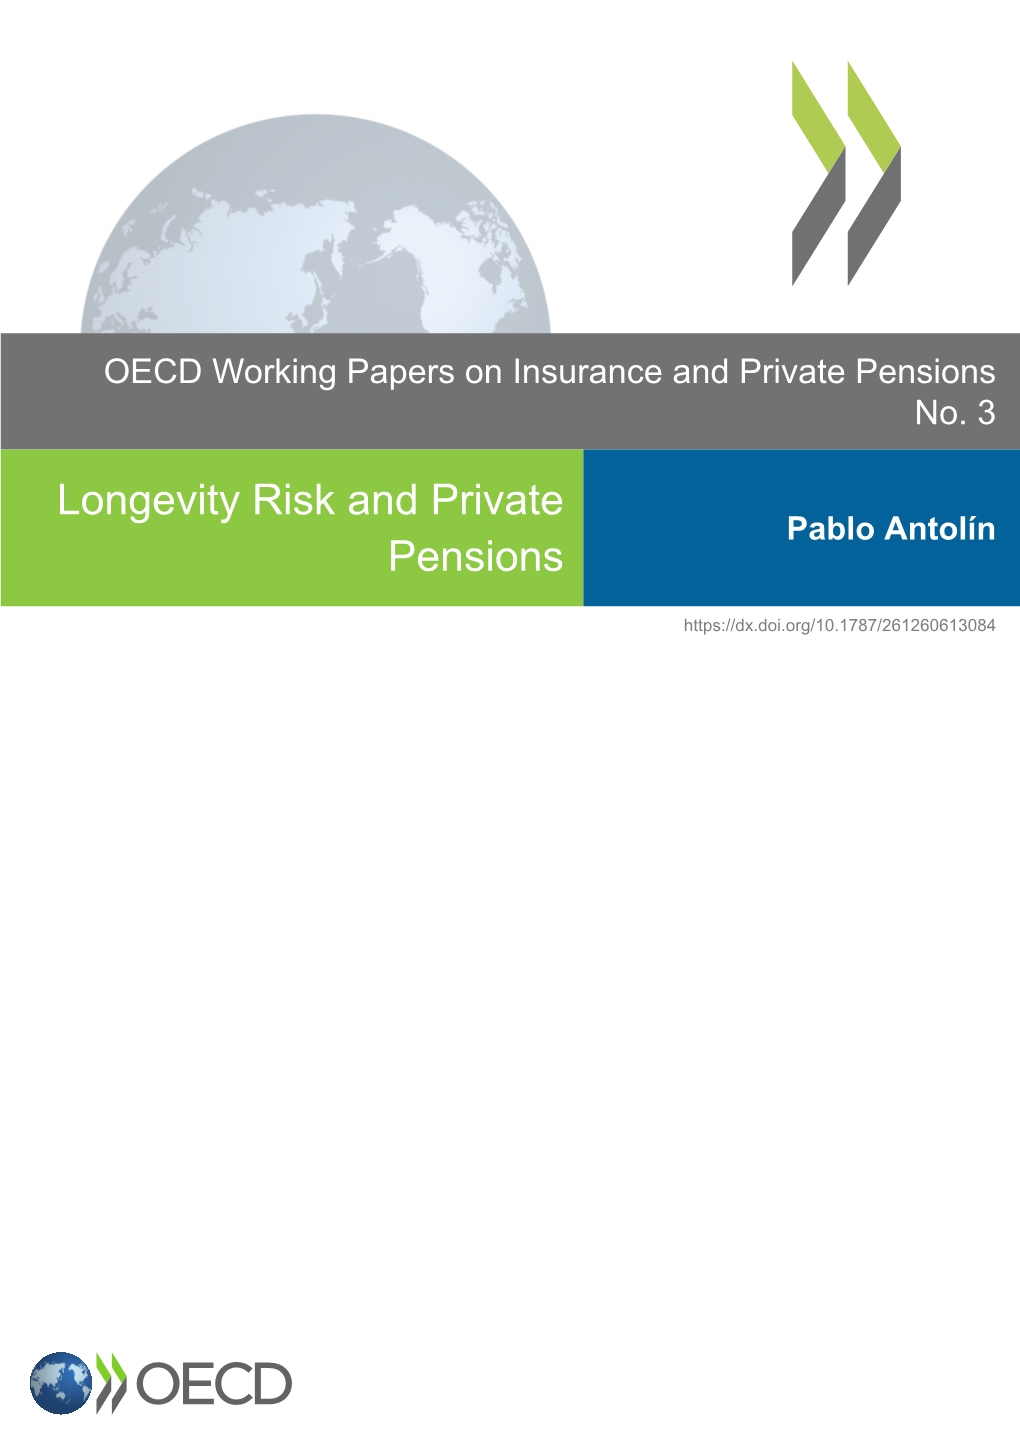 Longevity Risk and Private Pensions